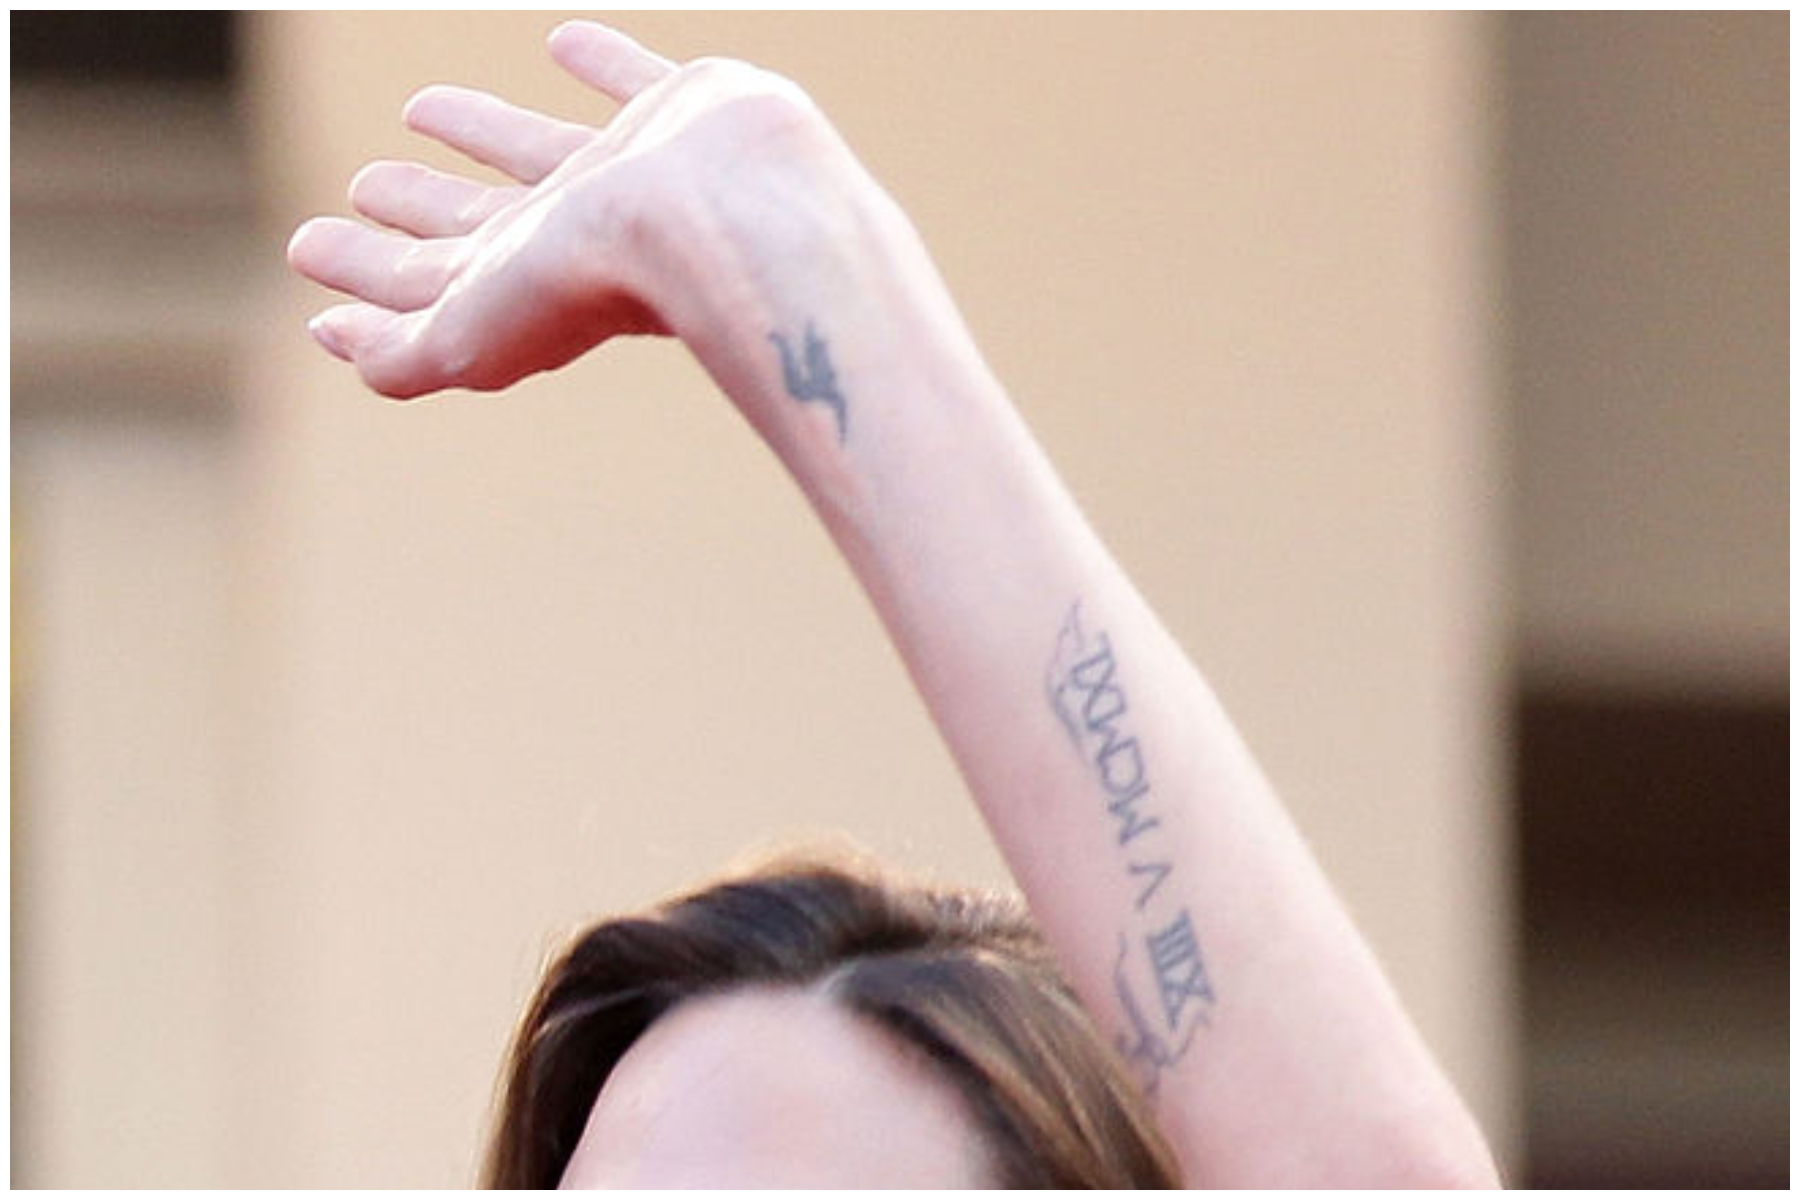 Actress Angelina Jolie's letter h tattoo is seen as she attends "The Tree Of Life" premiere during the 64th Annual Cannes Film Festival at Palais des Festivals in Cannes, France.